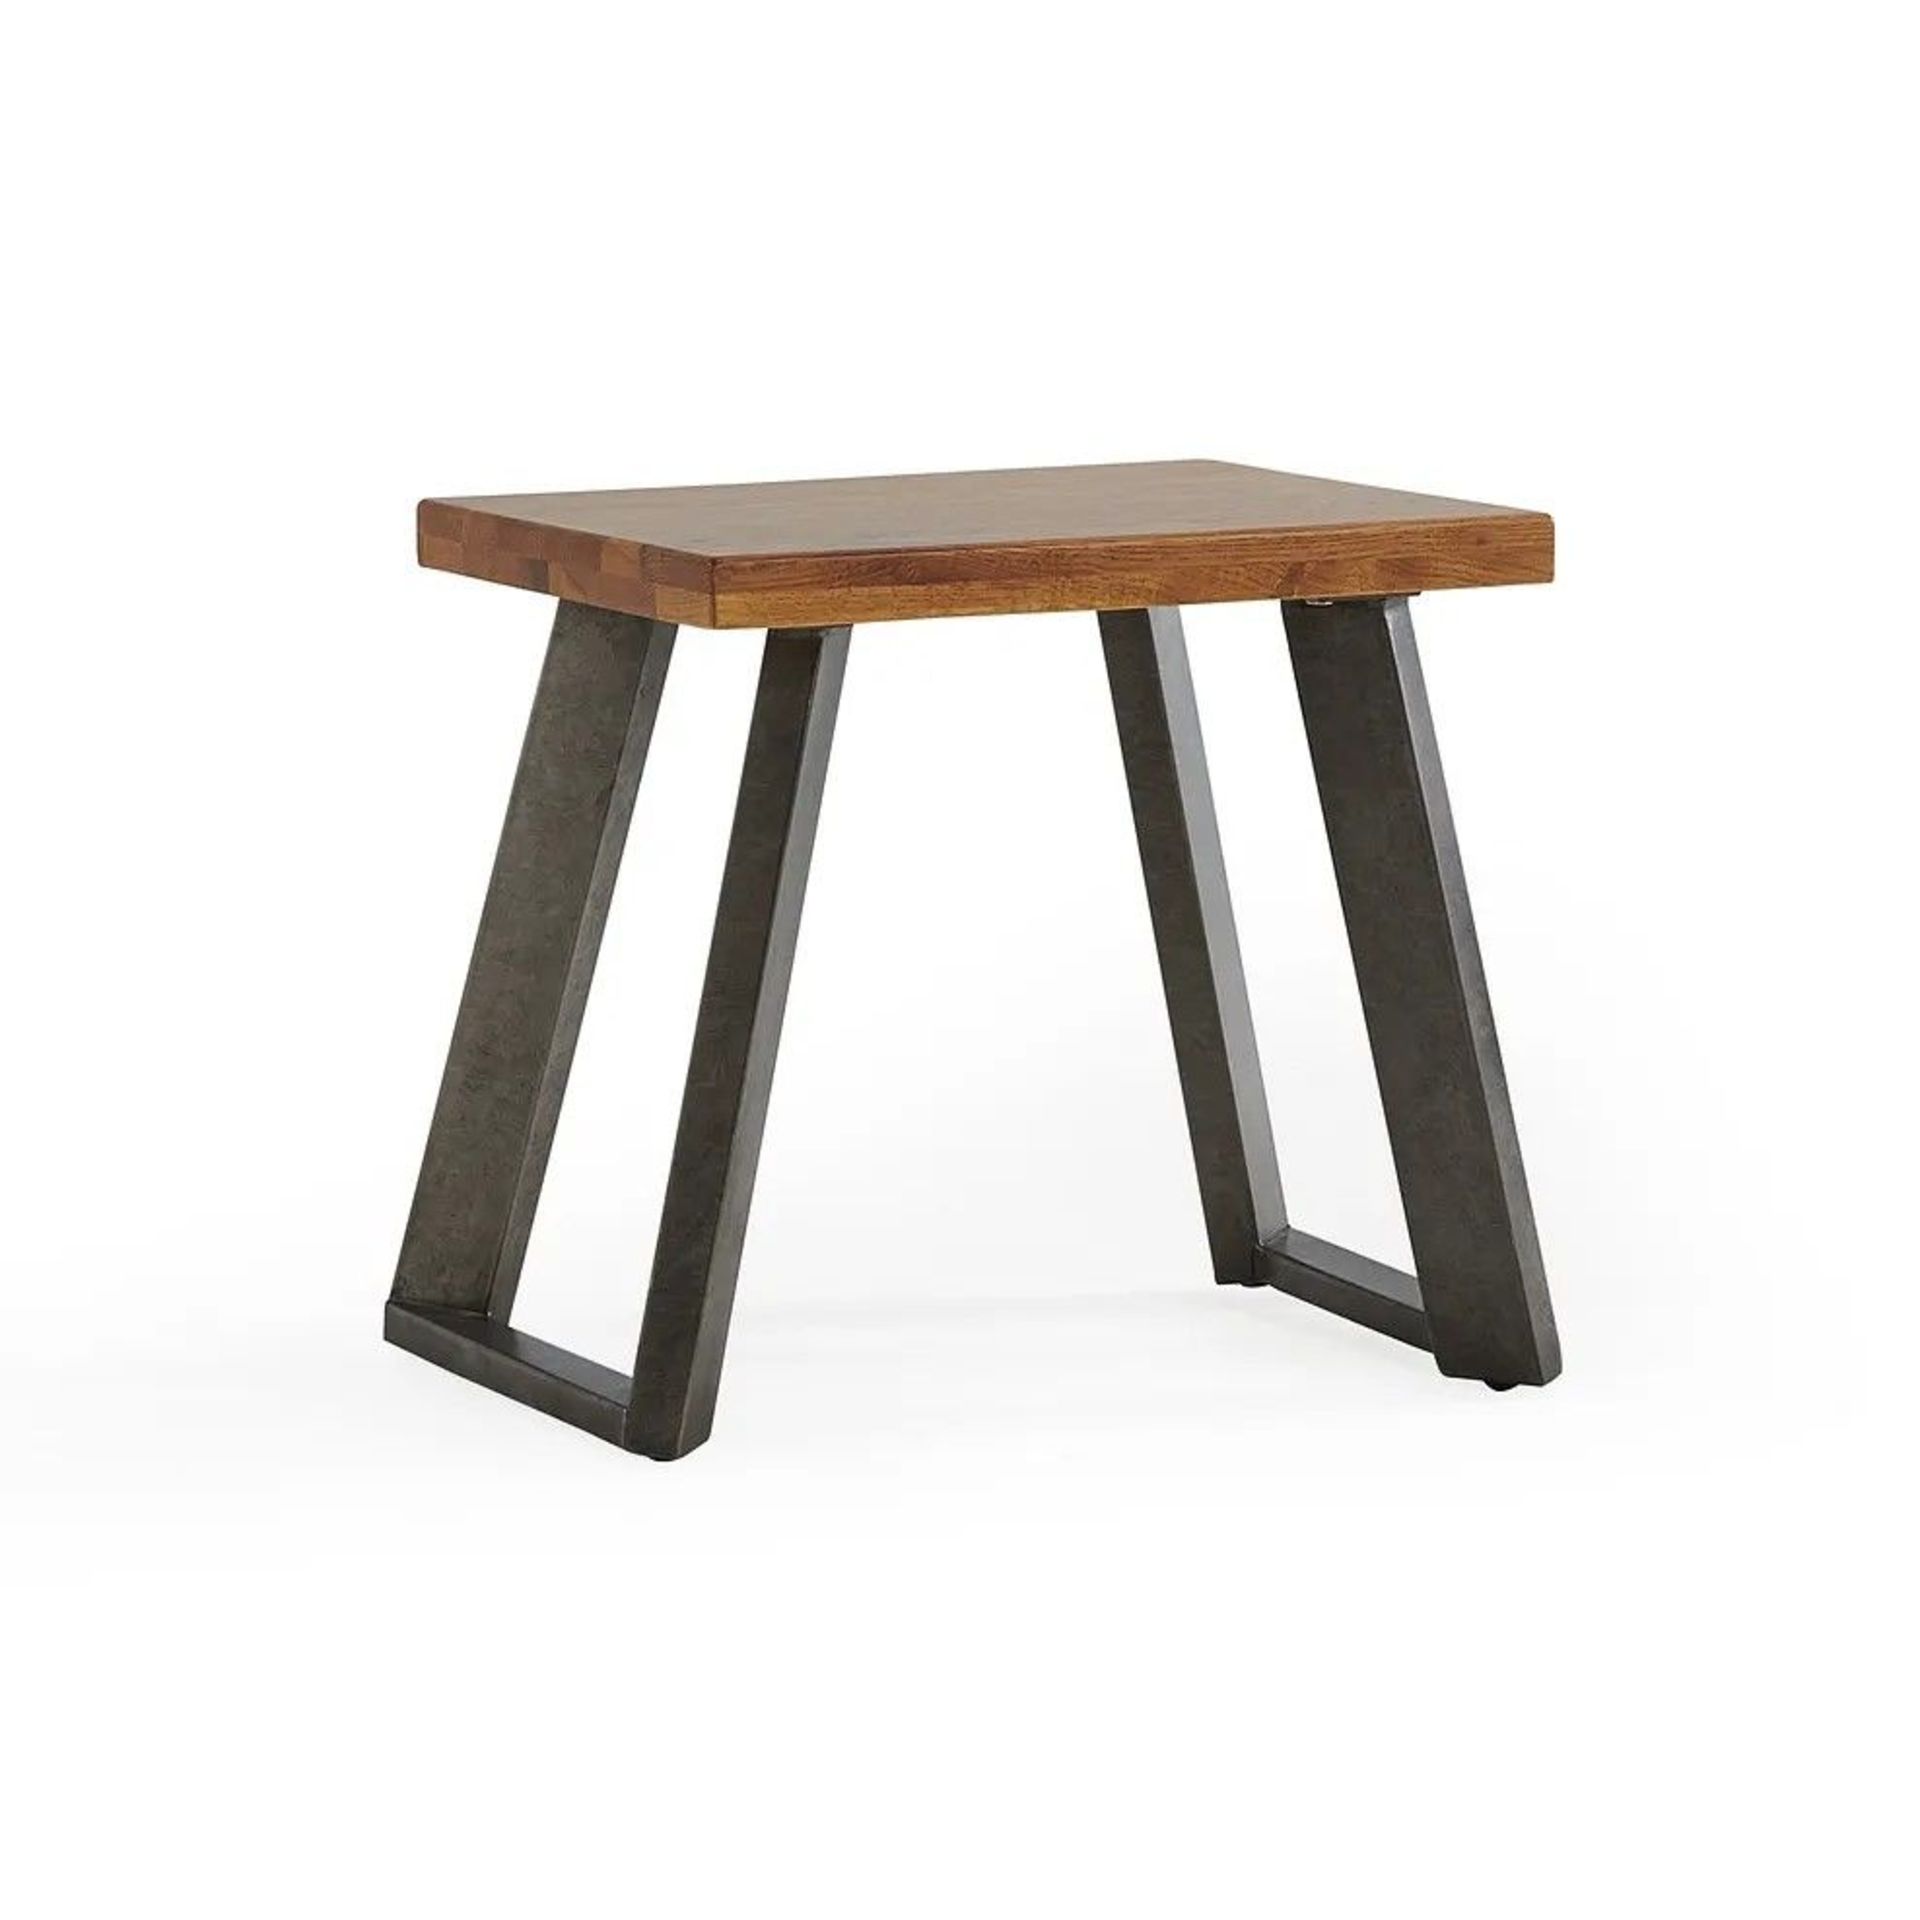 4 X NEW BOXED Cantelever Rustic Solid Oak & Metal Stool. RRP £130 EACH, TOTAL RRP £520. ( - Image 2 of 2